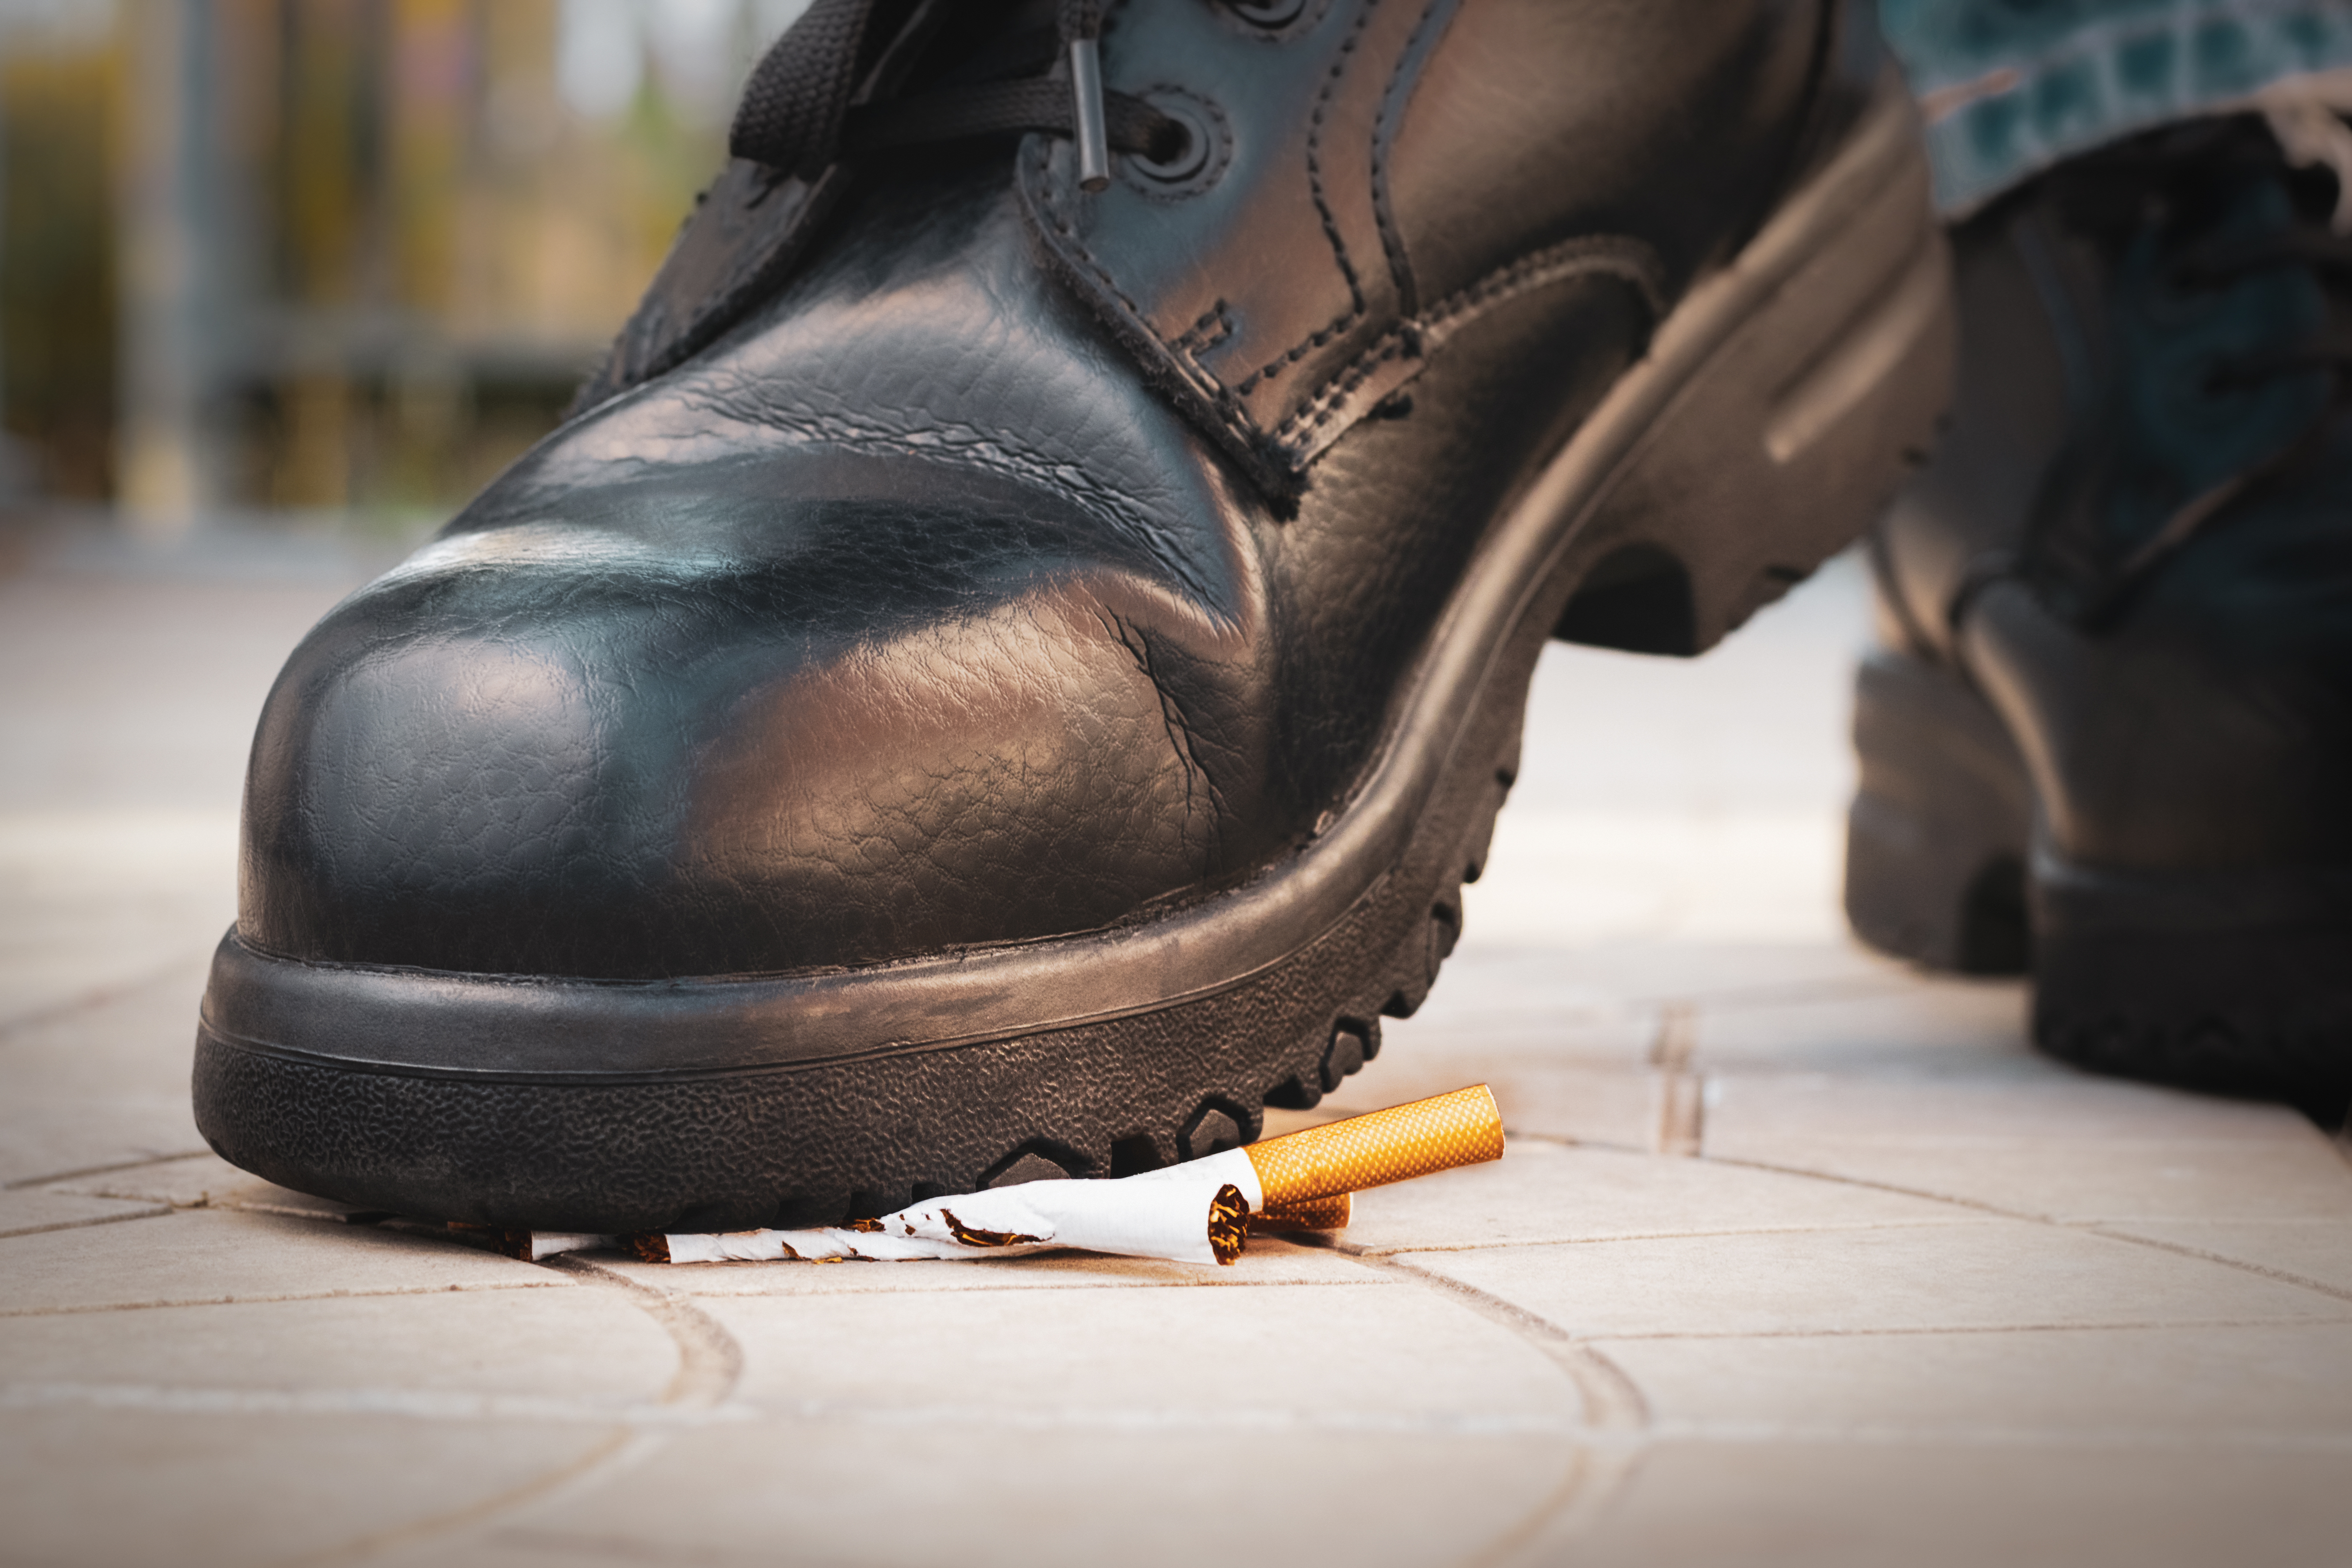 What are the effects of smoking on your feet?